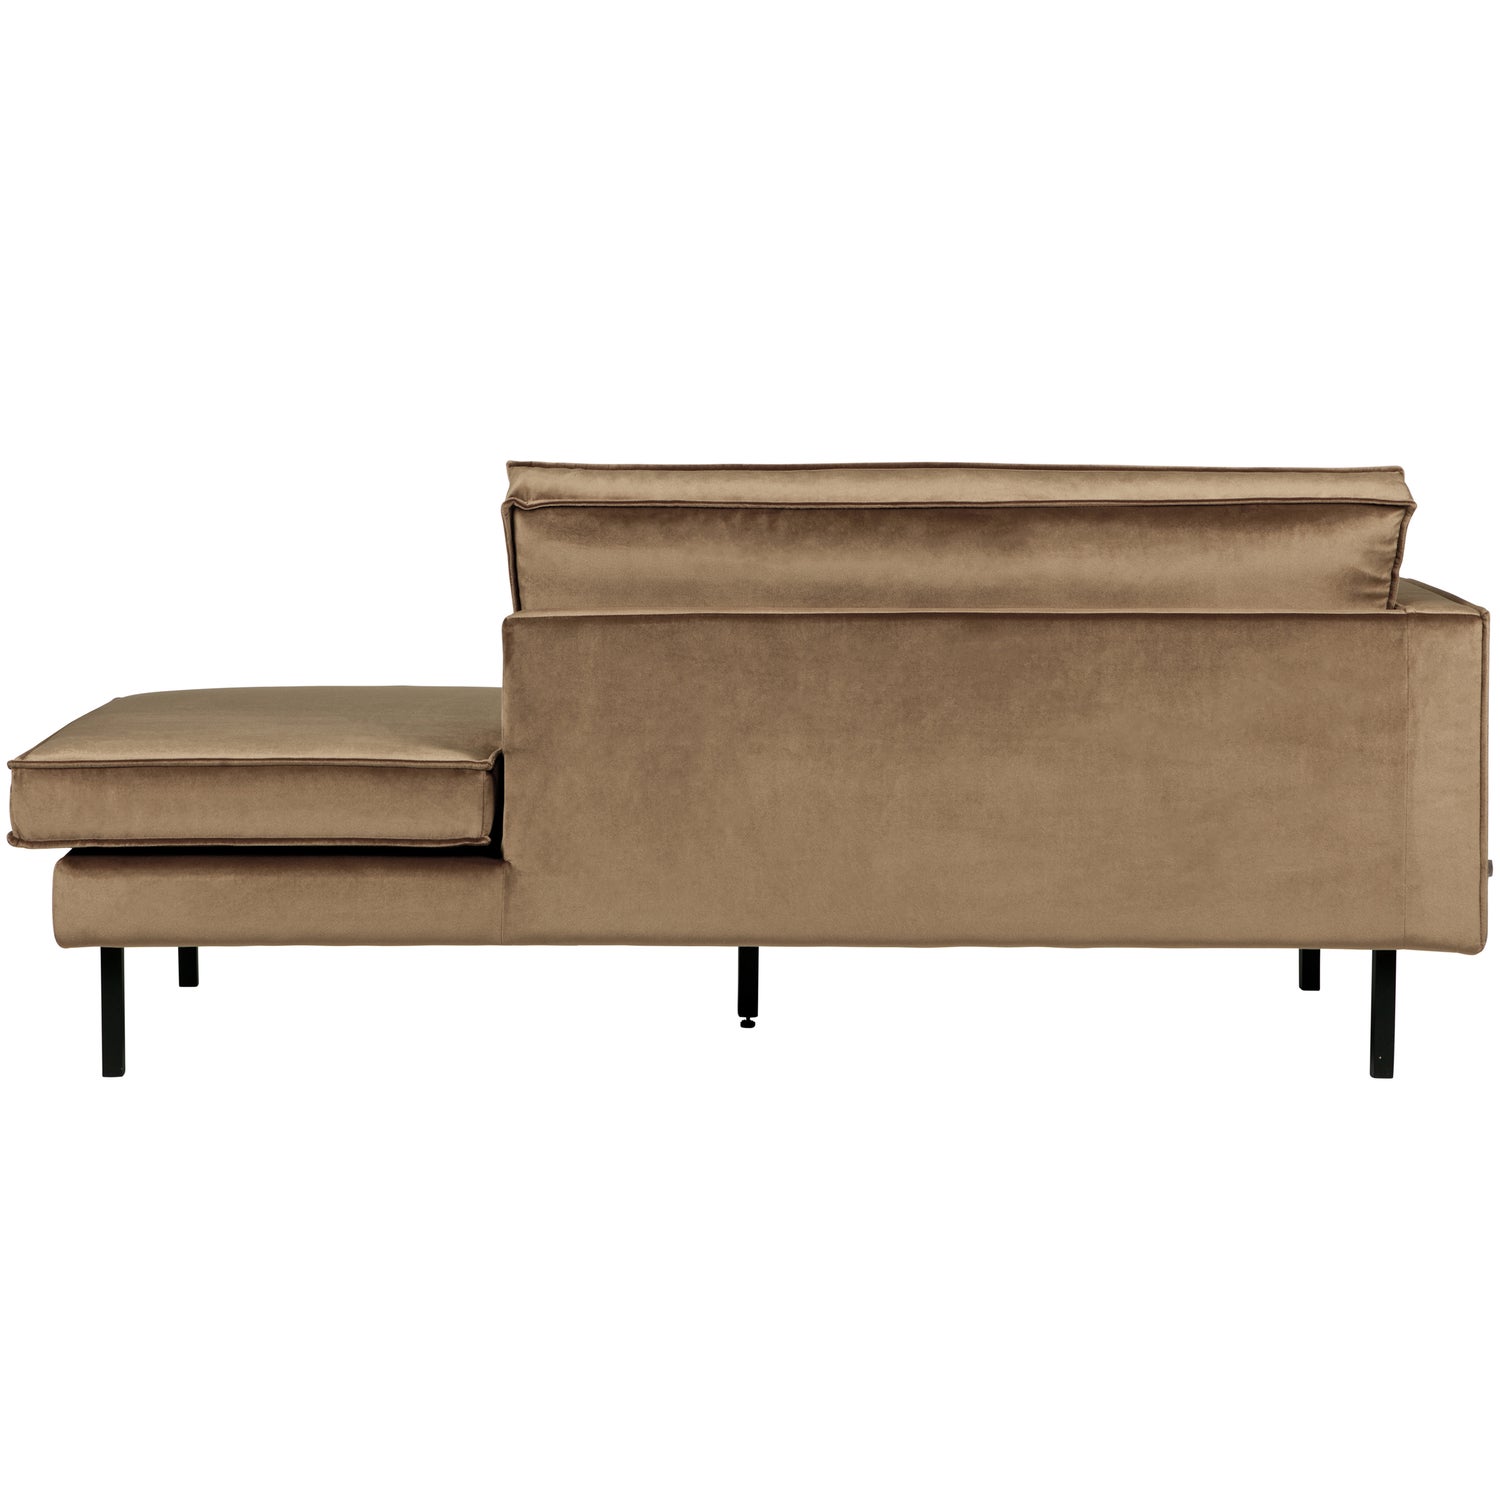 800743-12-03_VS_BP_Rodeo_daybed_left_taupe_AK1.jpg?auto=webp&format=png&width=1500&height=1500